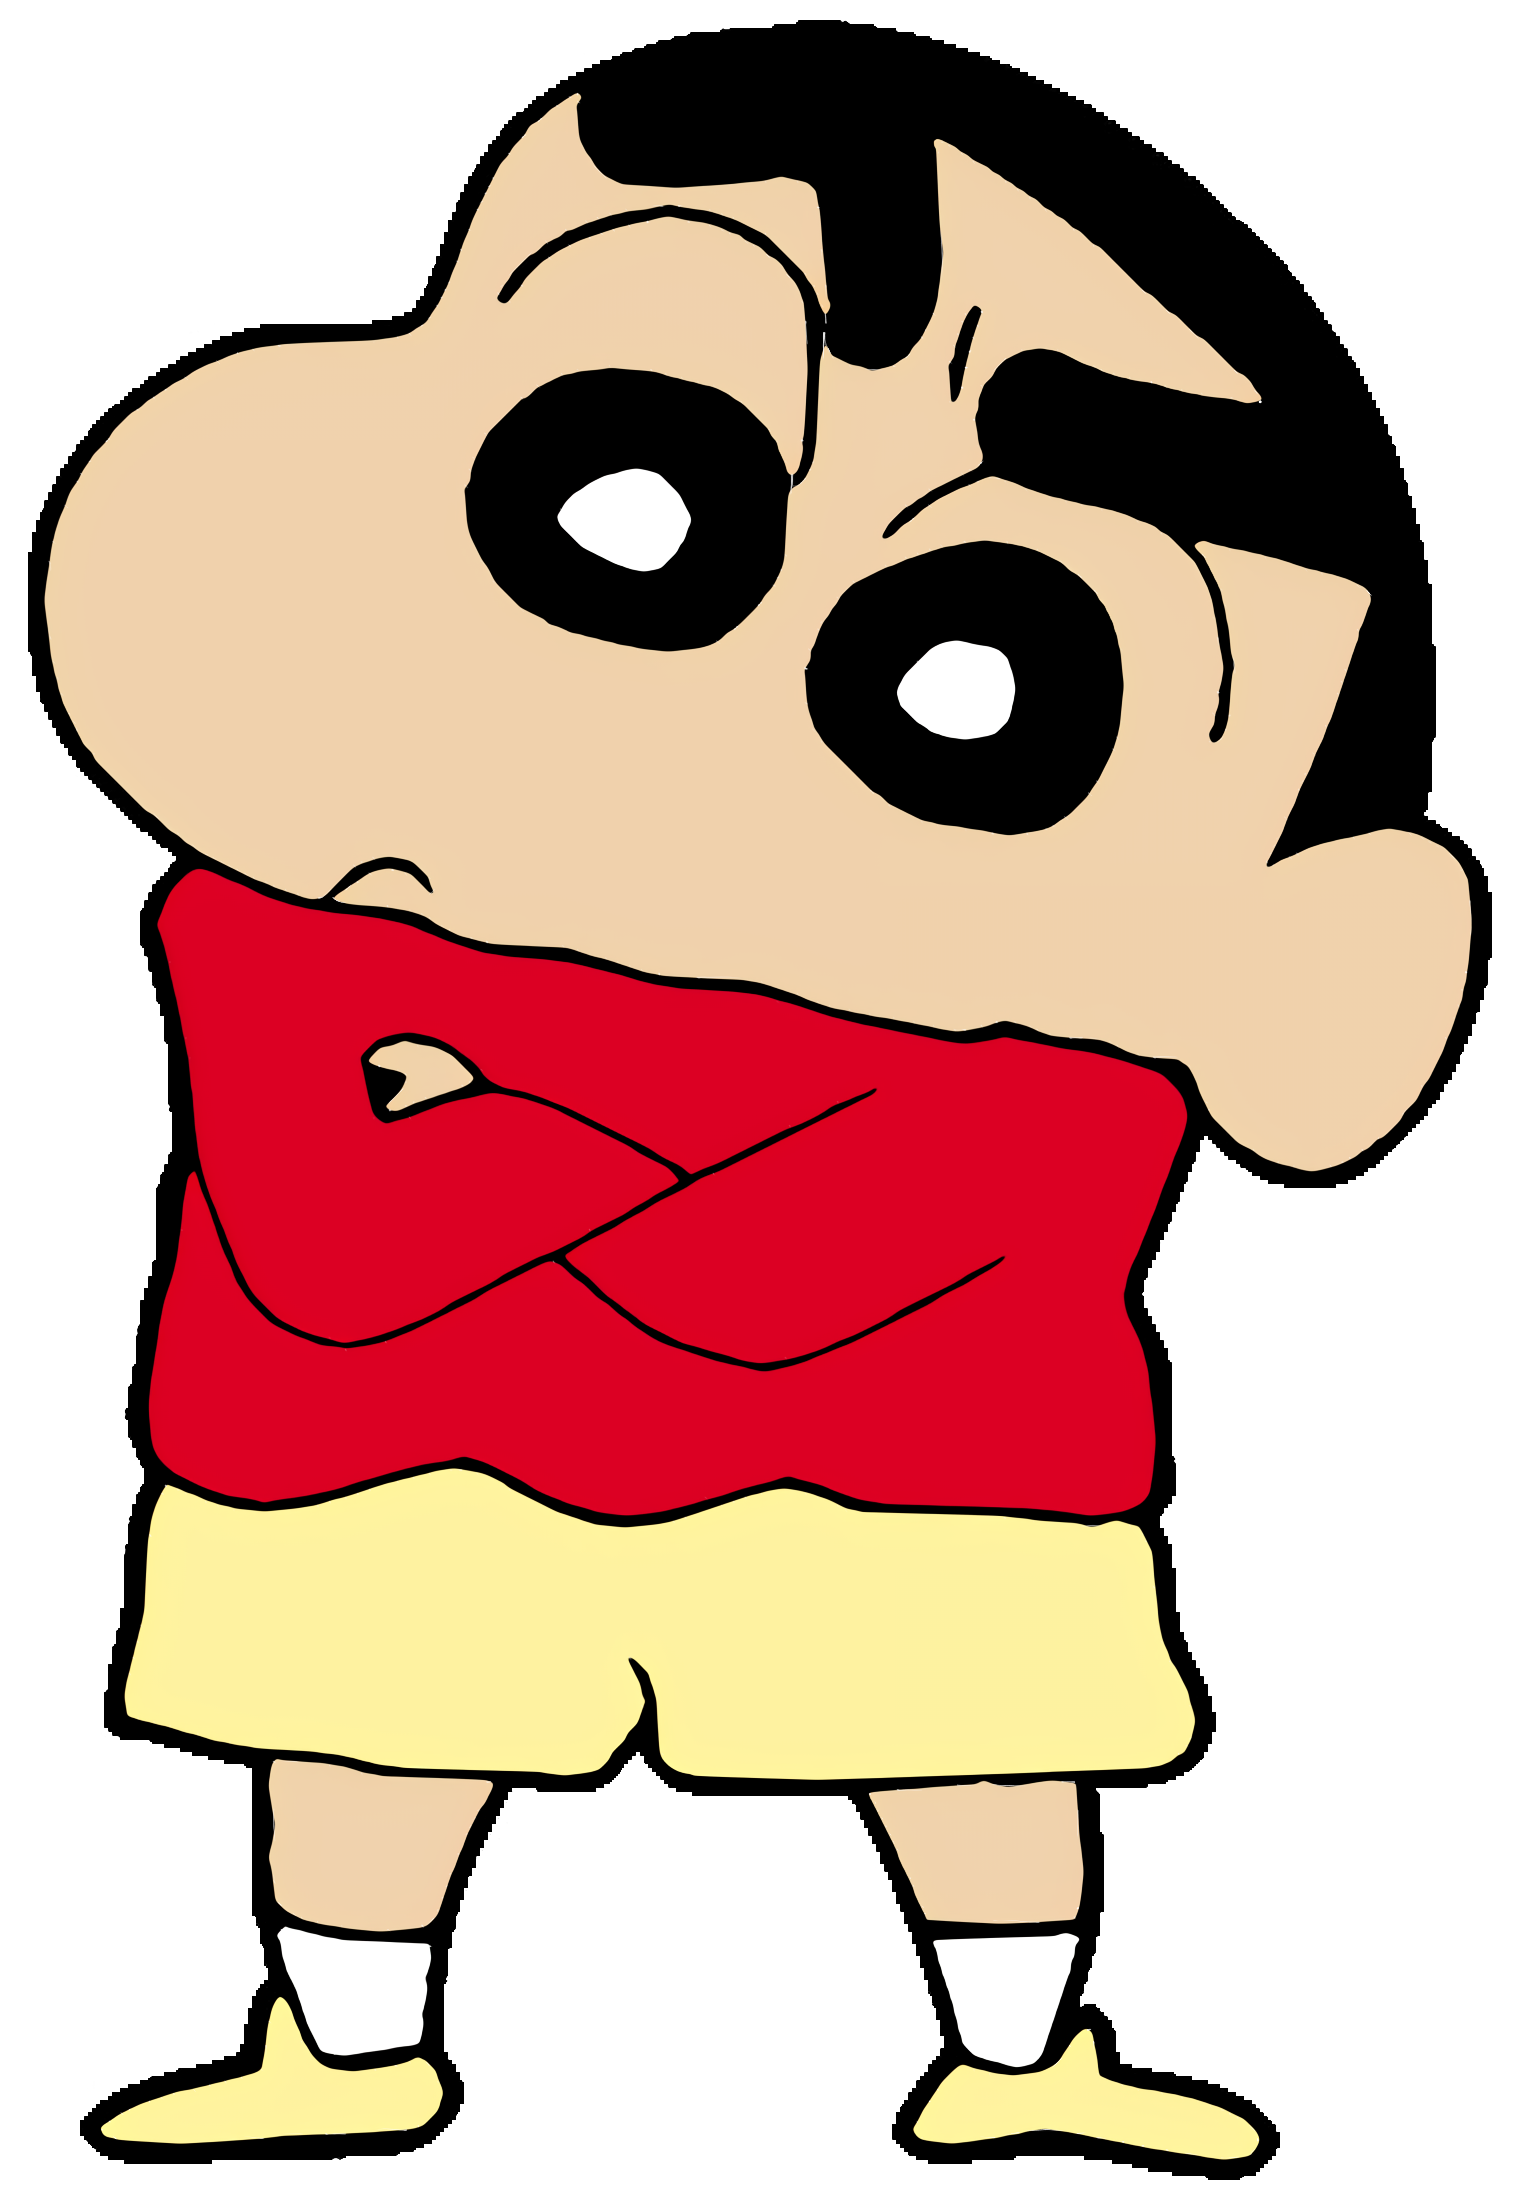 Shin chan and Friends Coloring Pages - Shin-chan Coloring Pages - Coloring  Pages For Kids And Adults